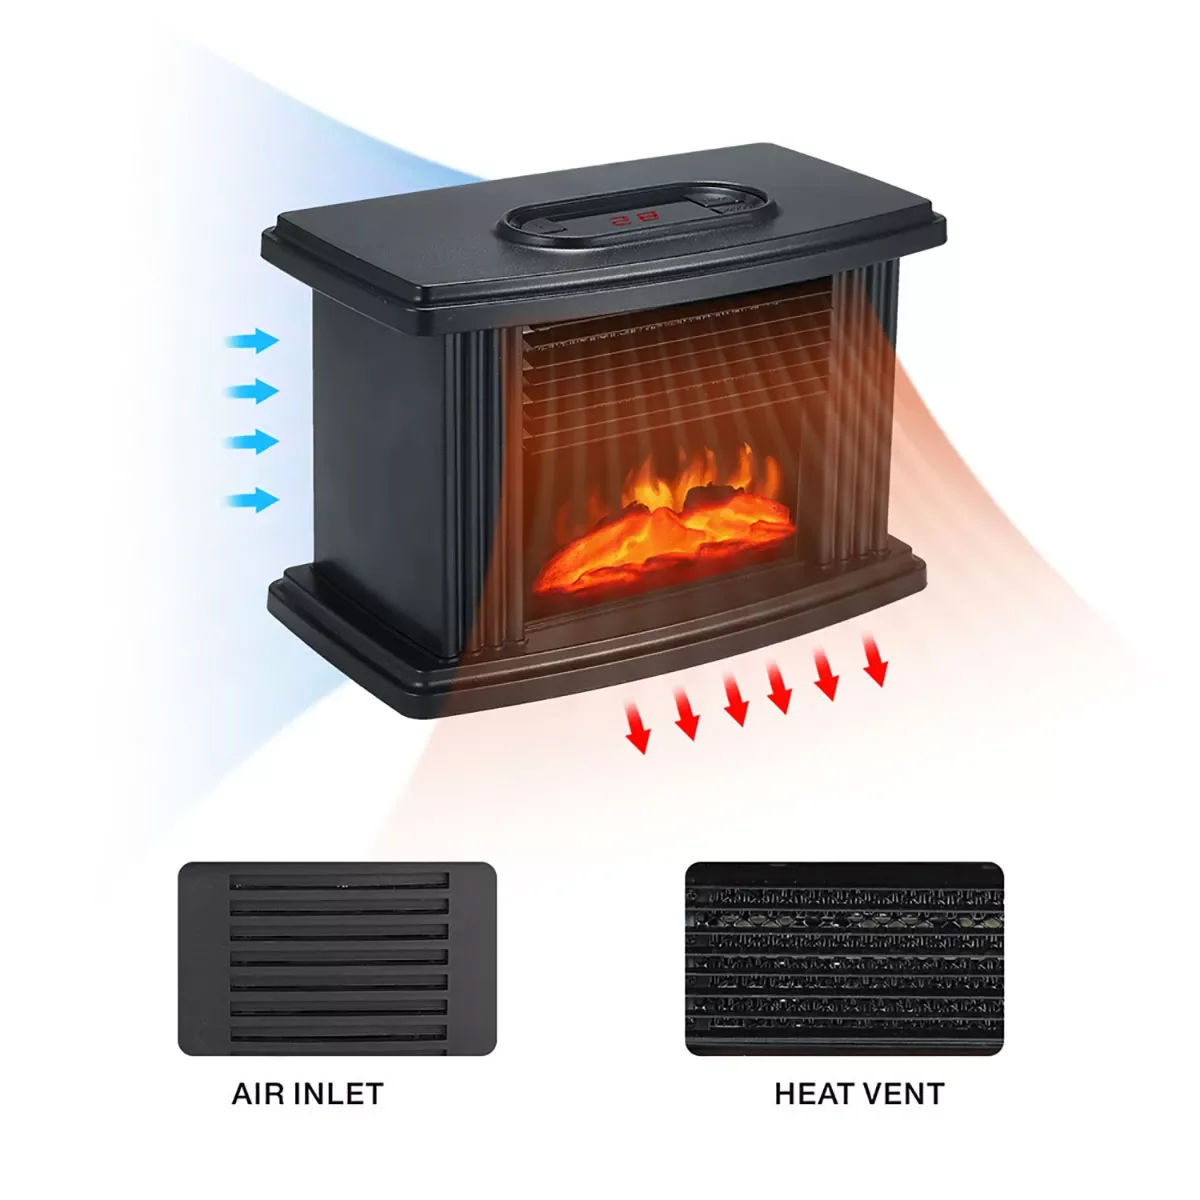 

1000W Electric Fireplace Heater Portable 3 Gear Desktop Flame Heater Stove Air Warmer Fan For Living Room Bedroom Home Heaters